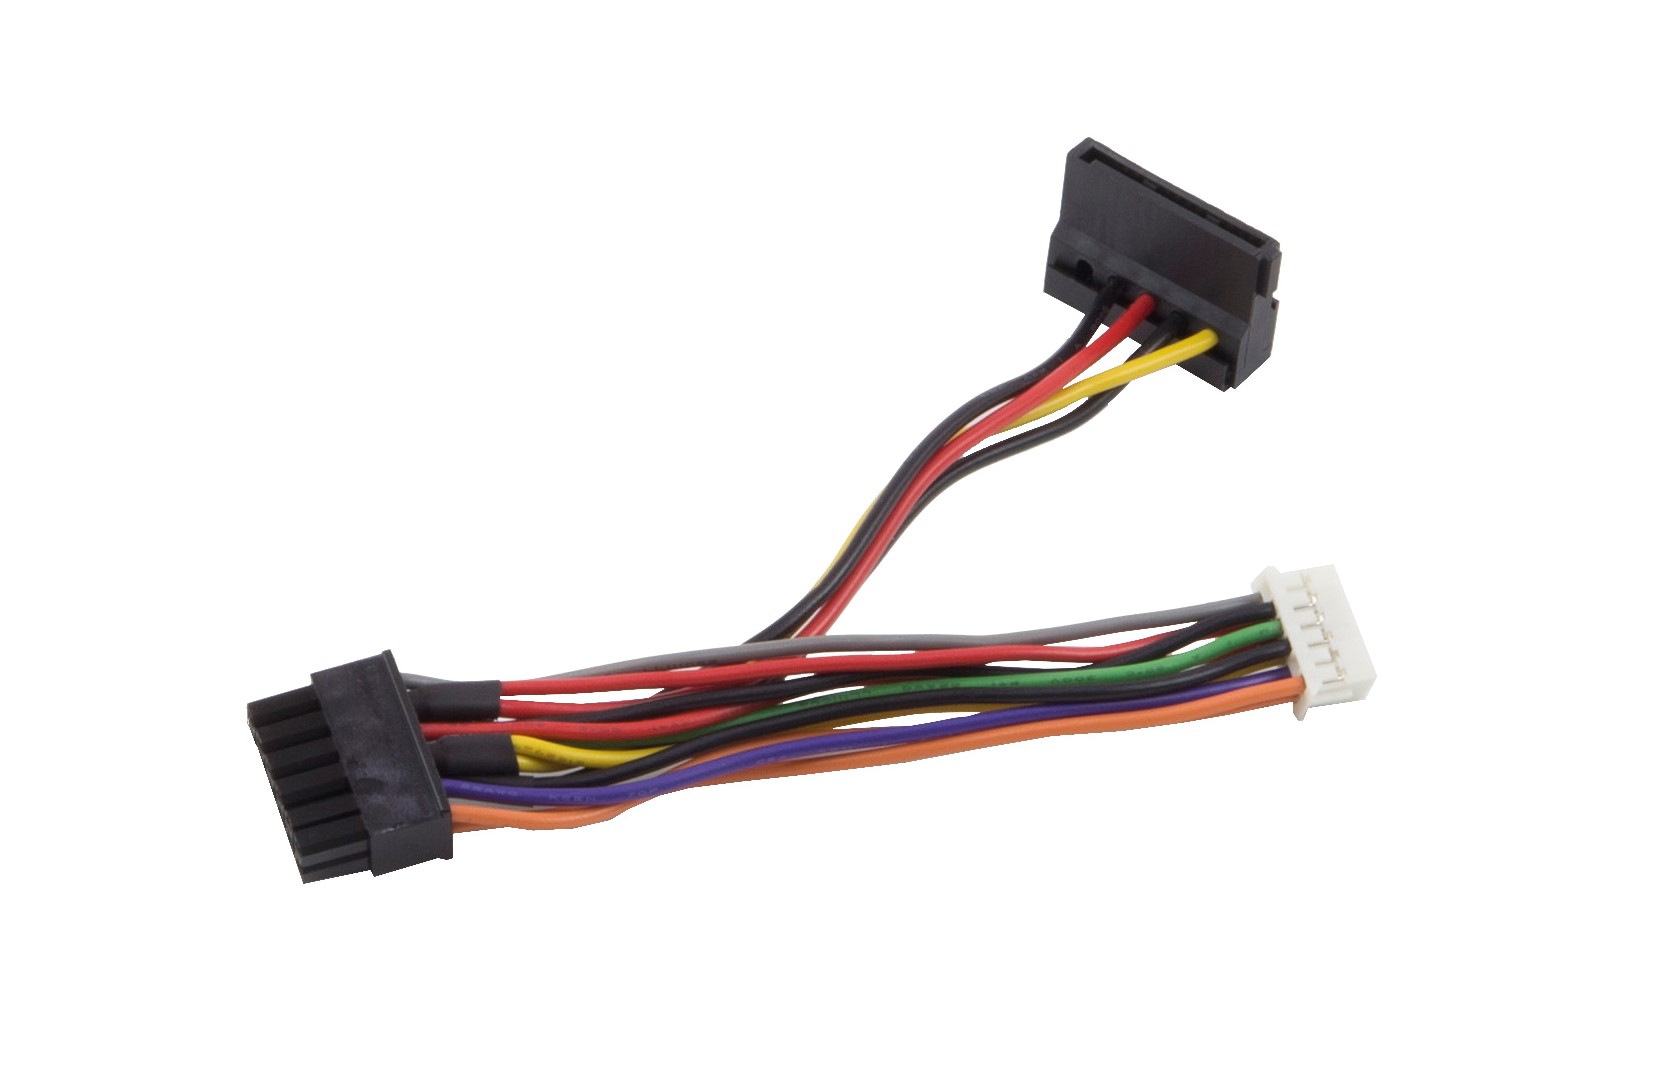 12-12 POWER CABLE+SATA CABLE  |Products|Accessories|Cable & Cord